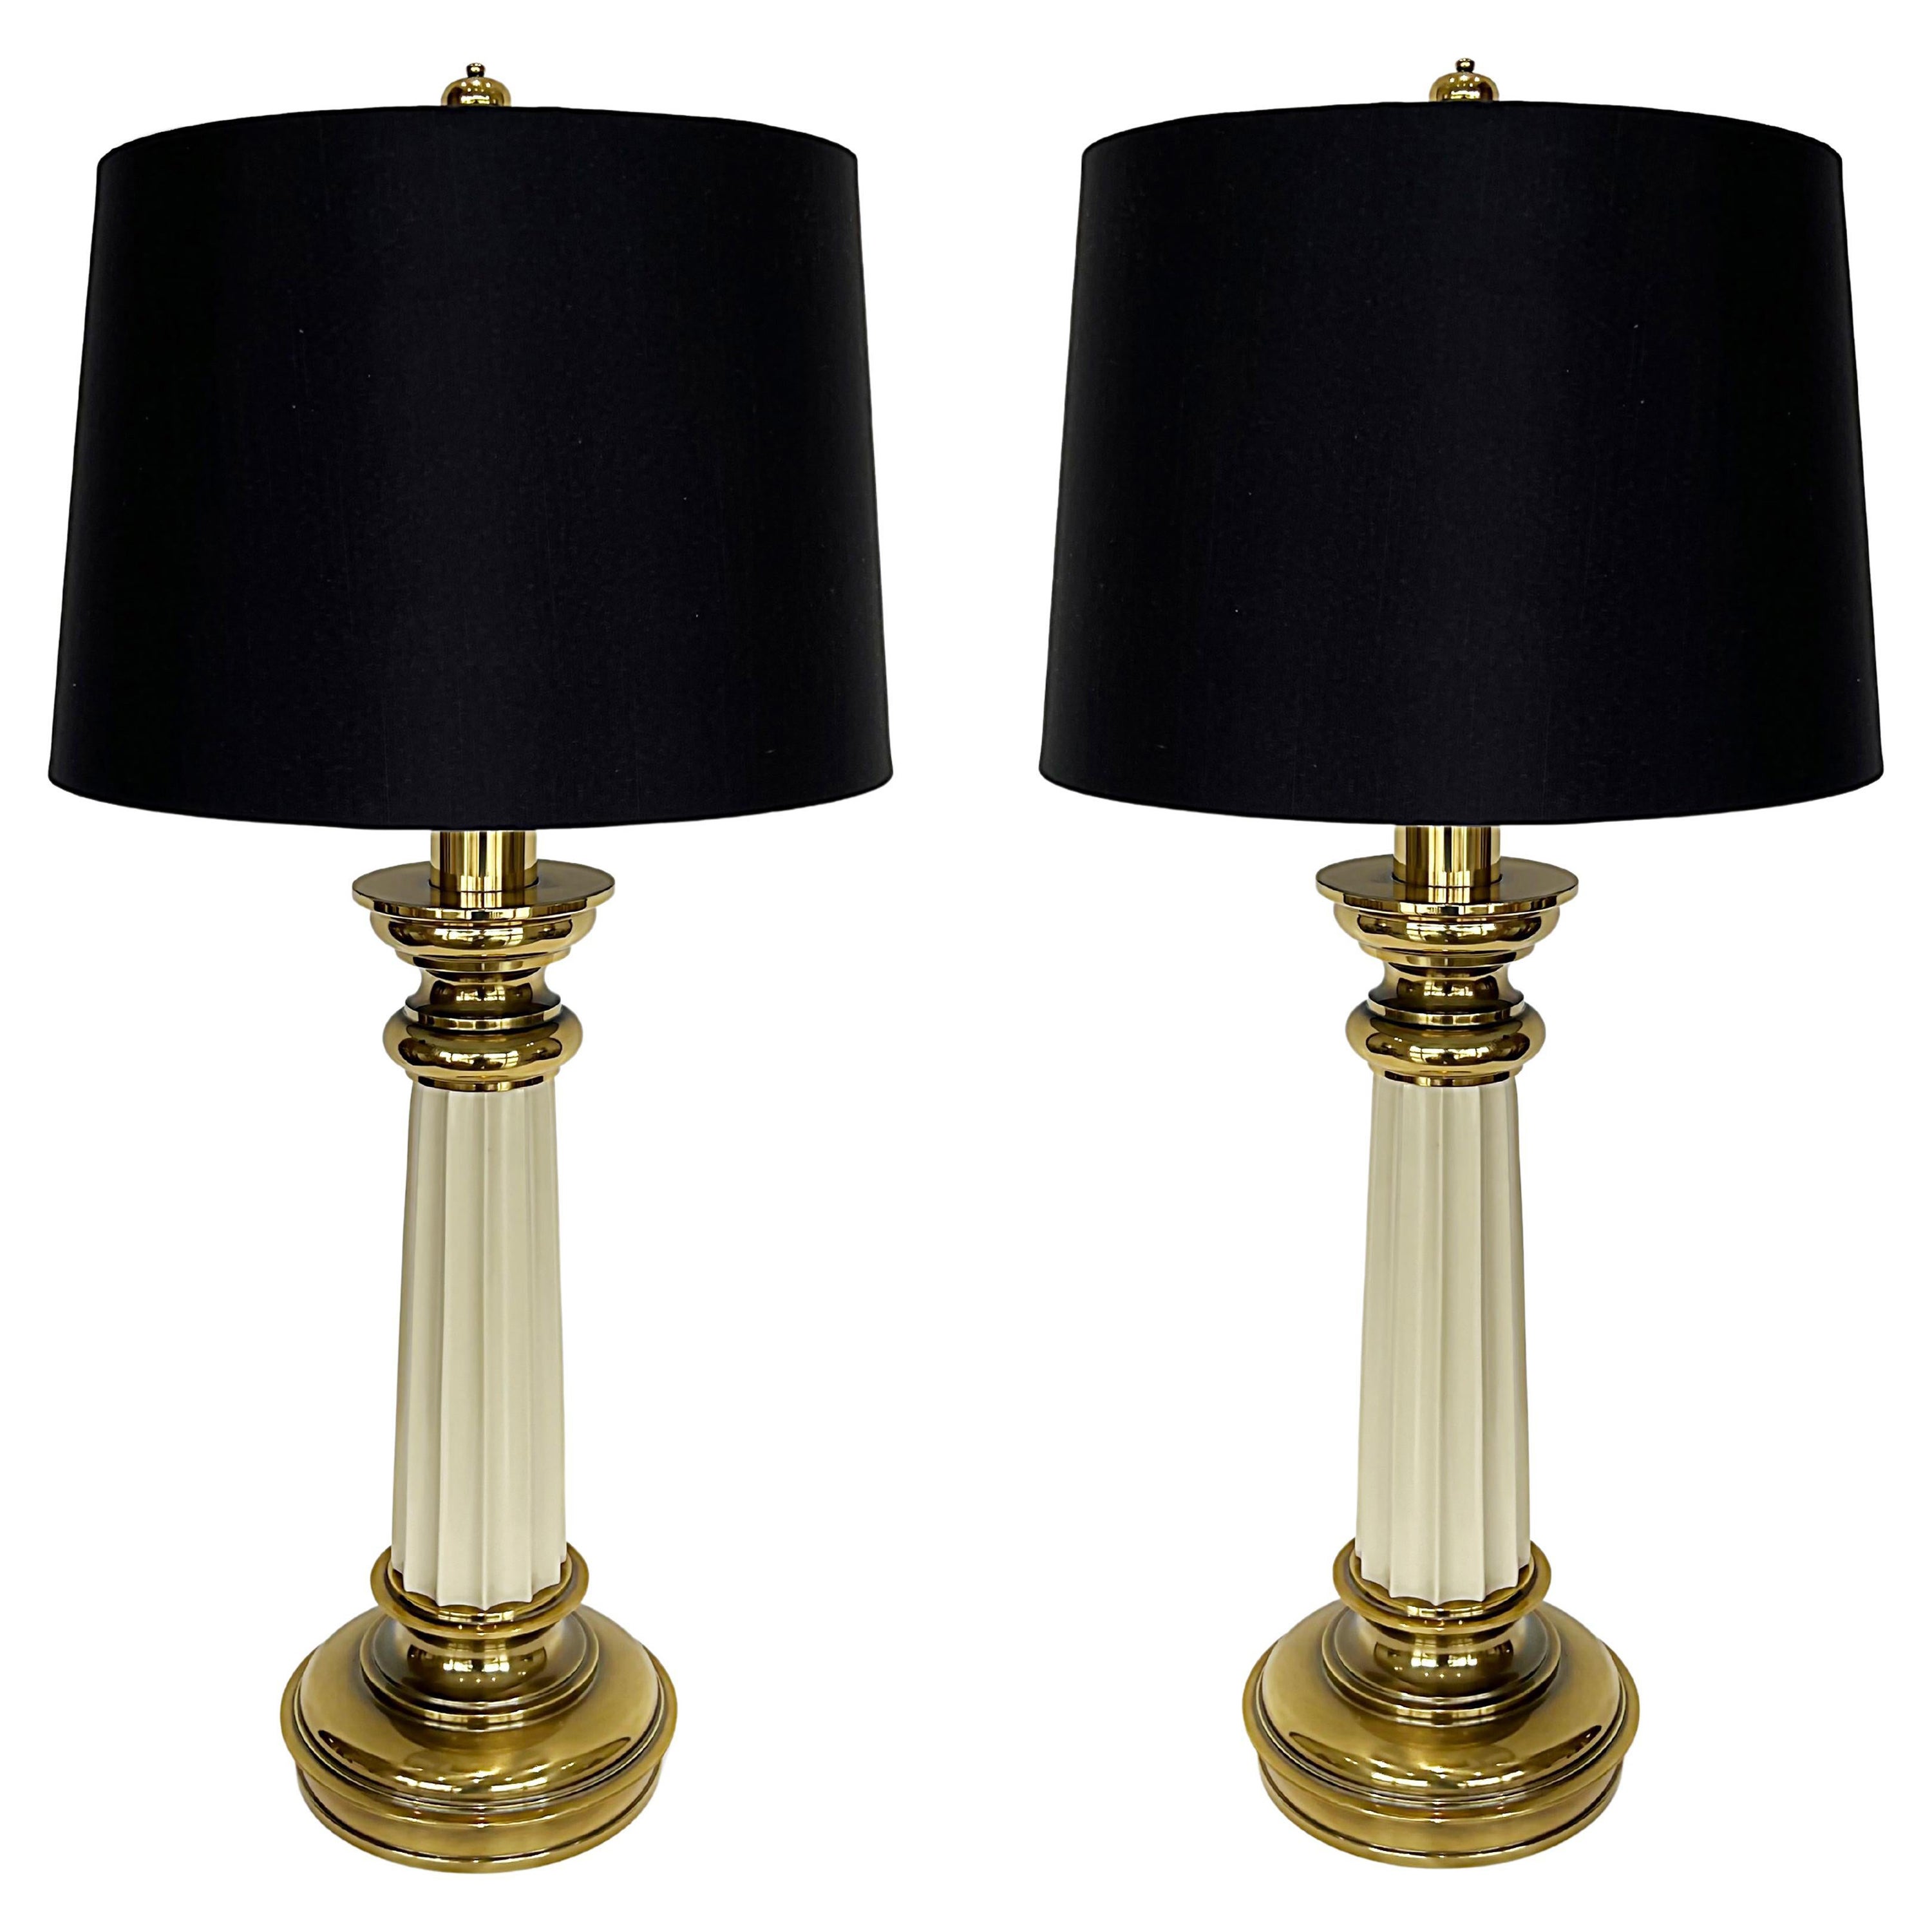 Vintage Brass Stiffel Column Table Lamps with Drum Shades, Pair